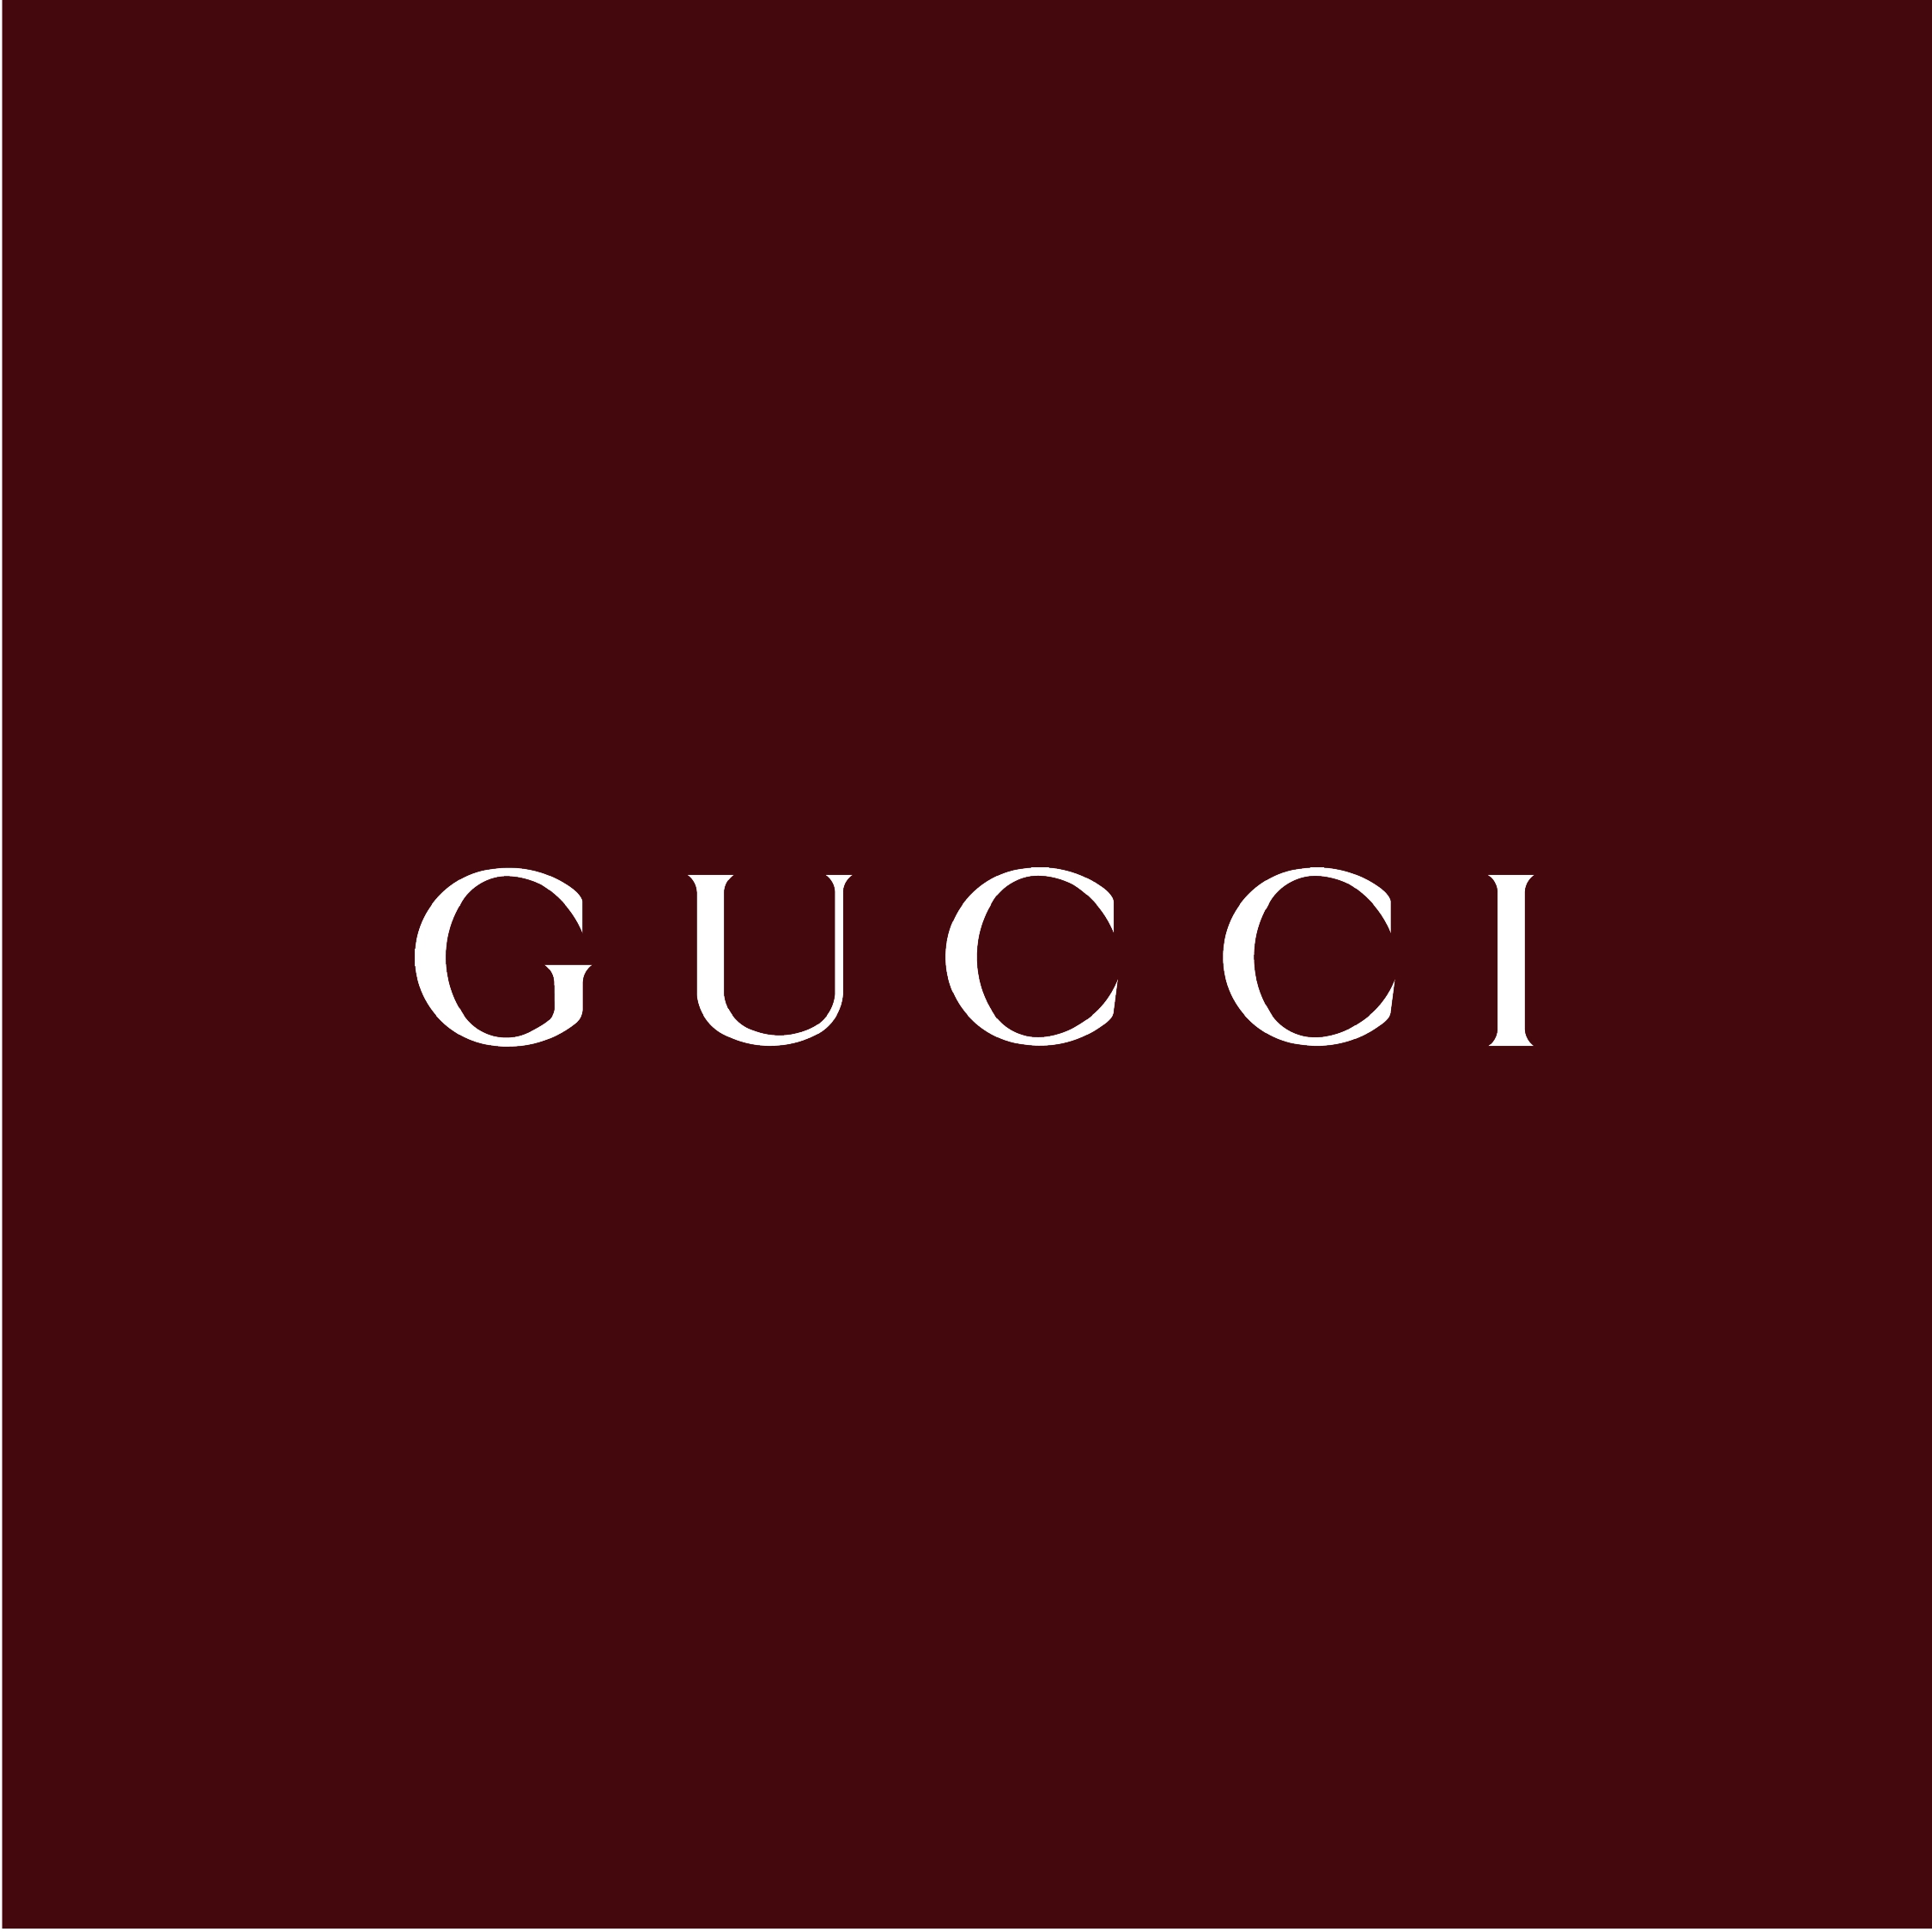 Stepping into the metaverse with Gucci